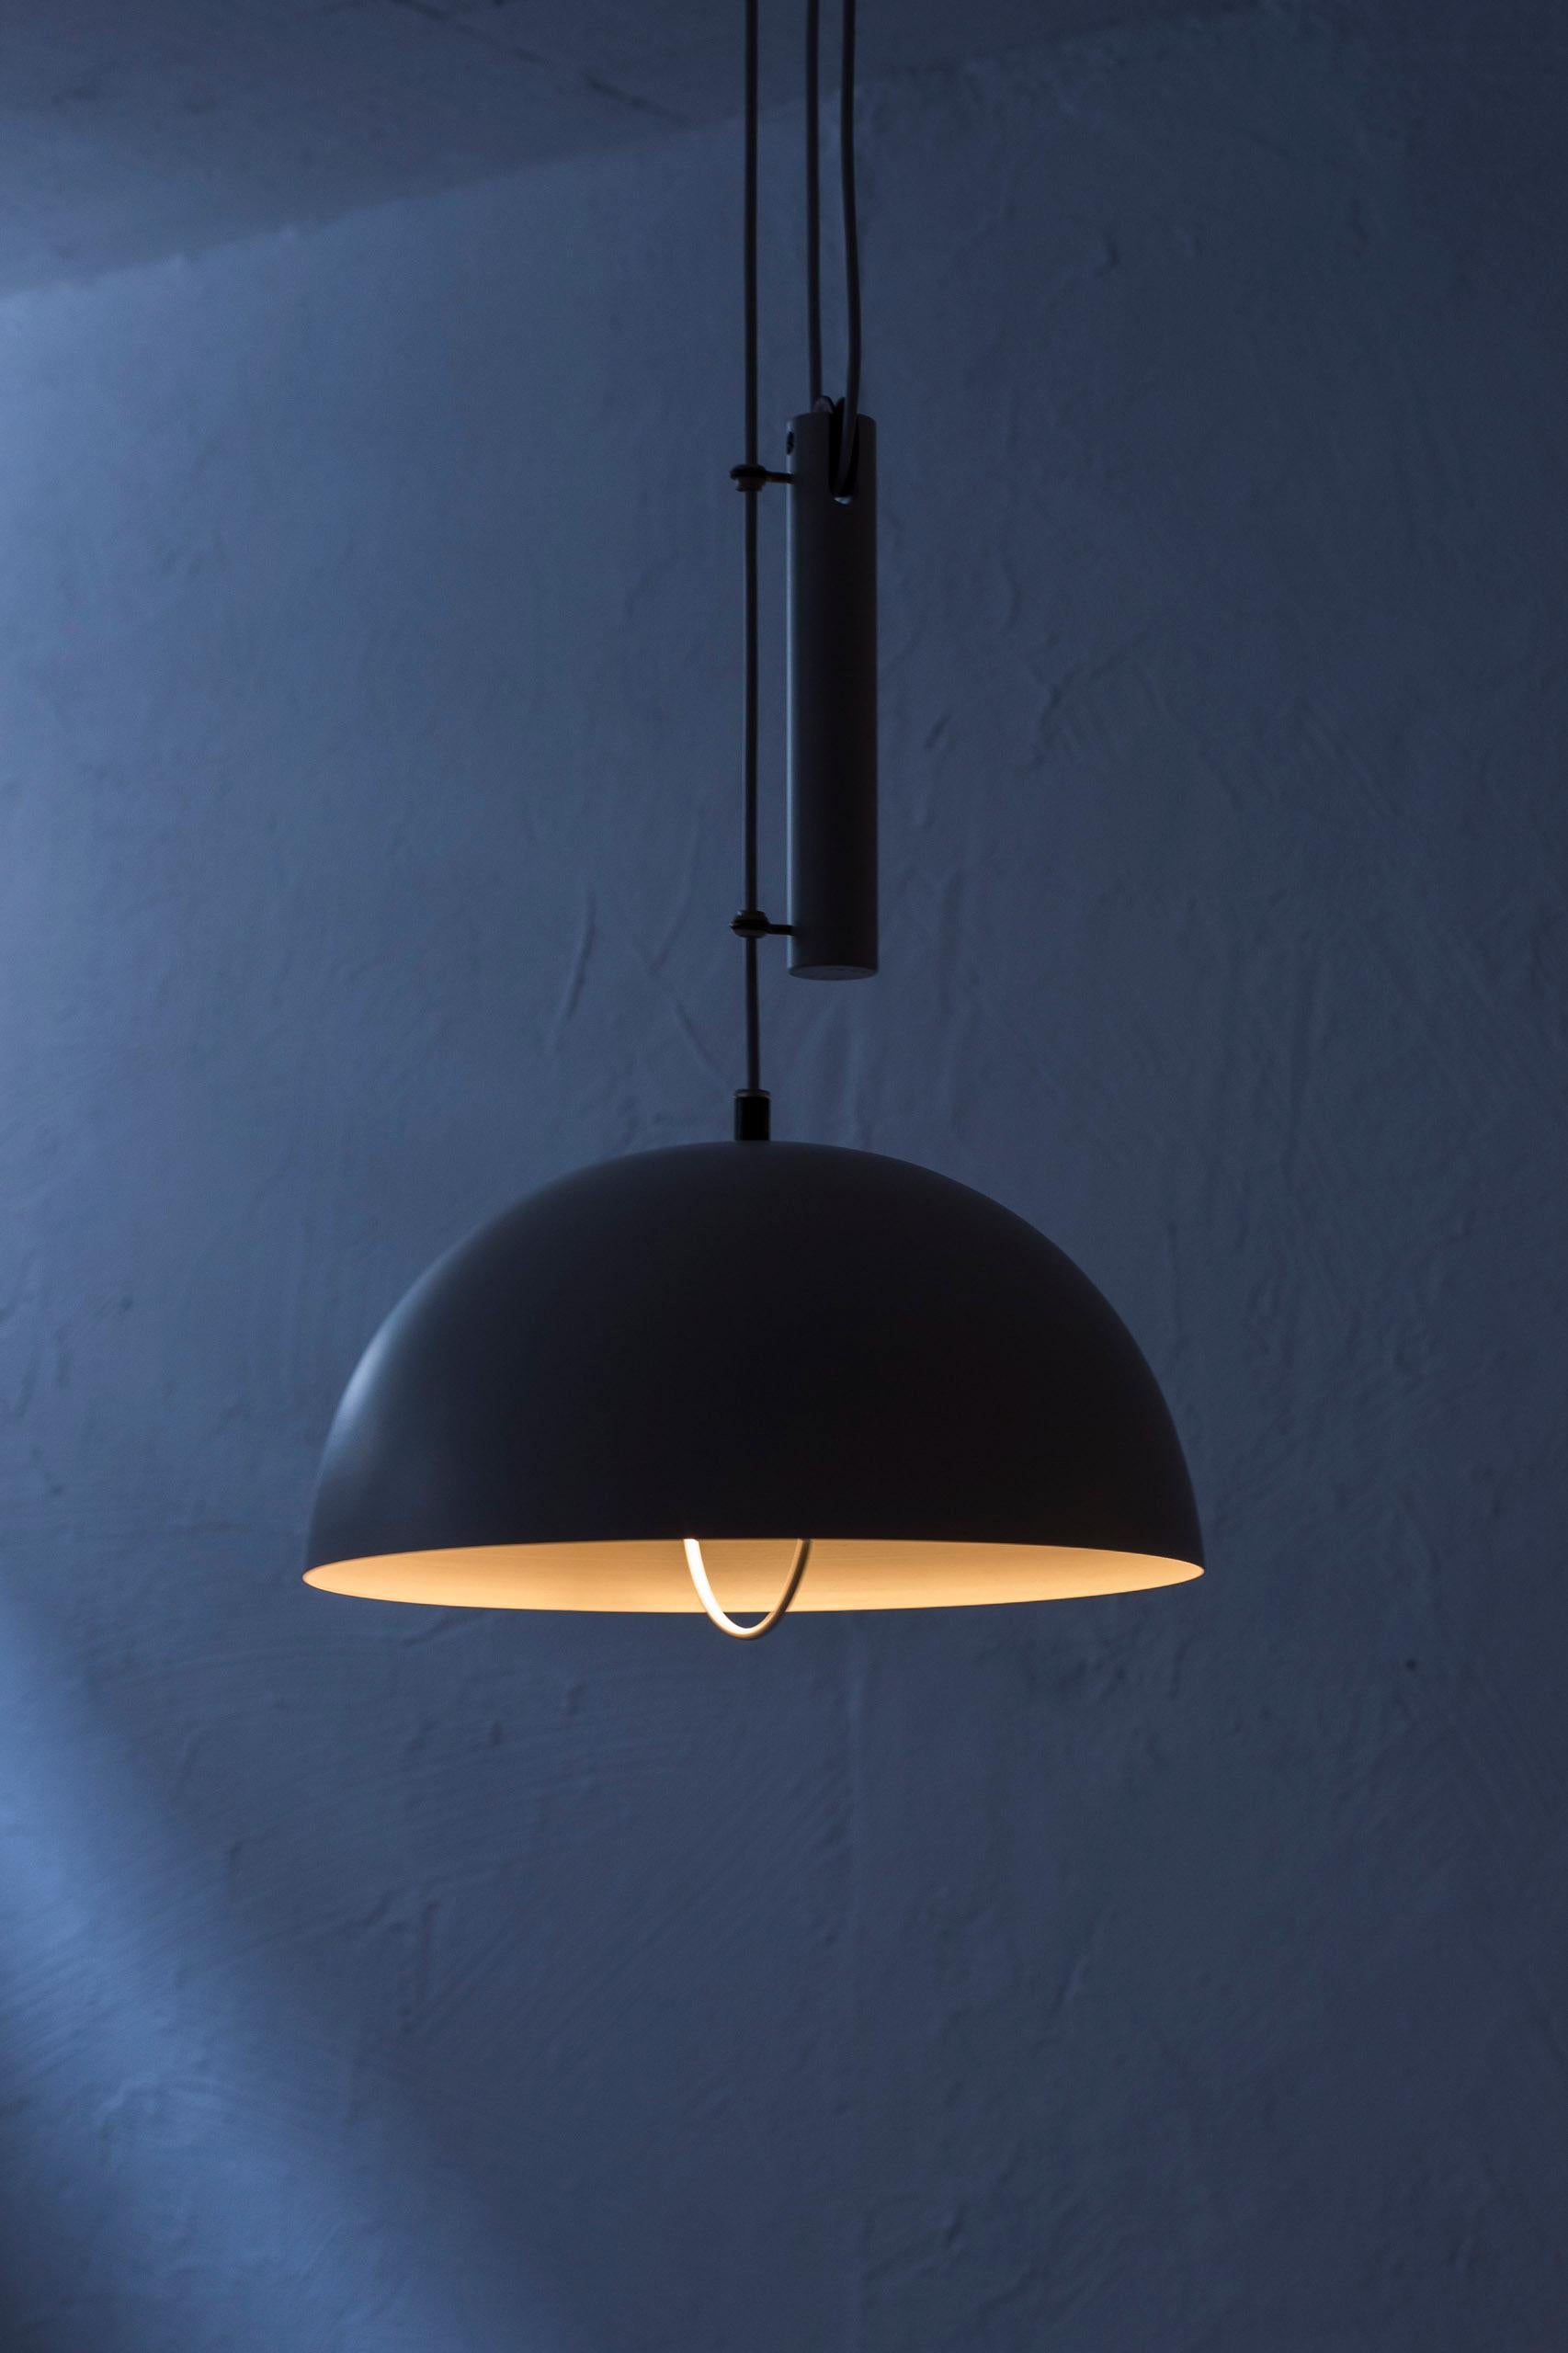 Pendant Lamps Attributed to Hans-Agne Jakobsson, Karlskron Lampfabrik, 1950s For Sale 2